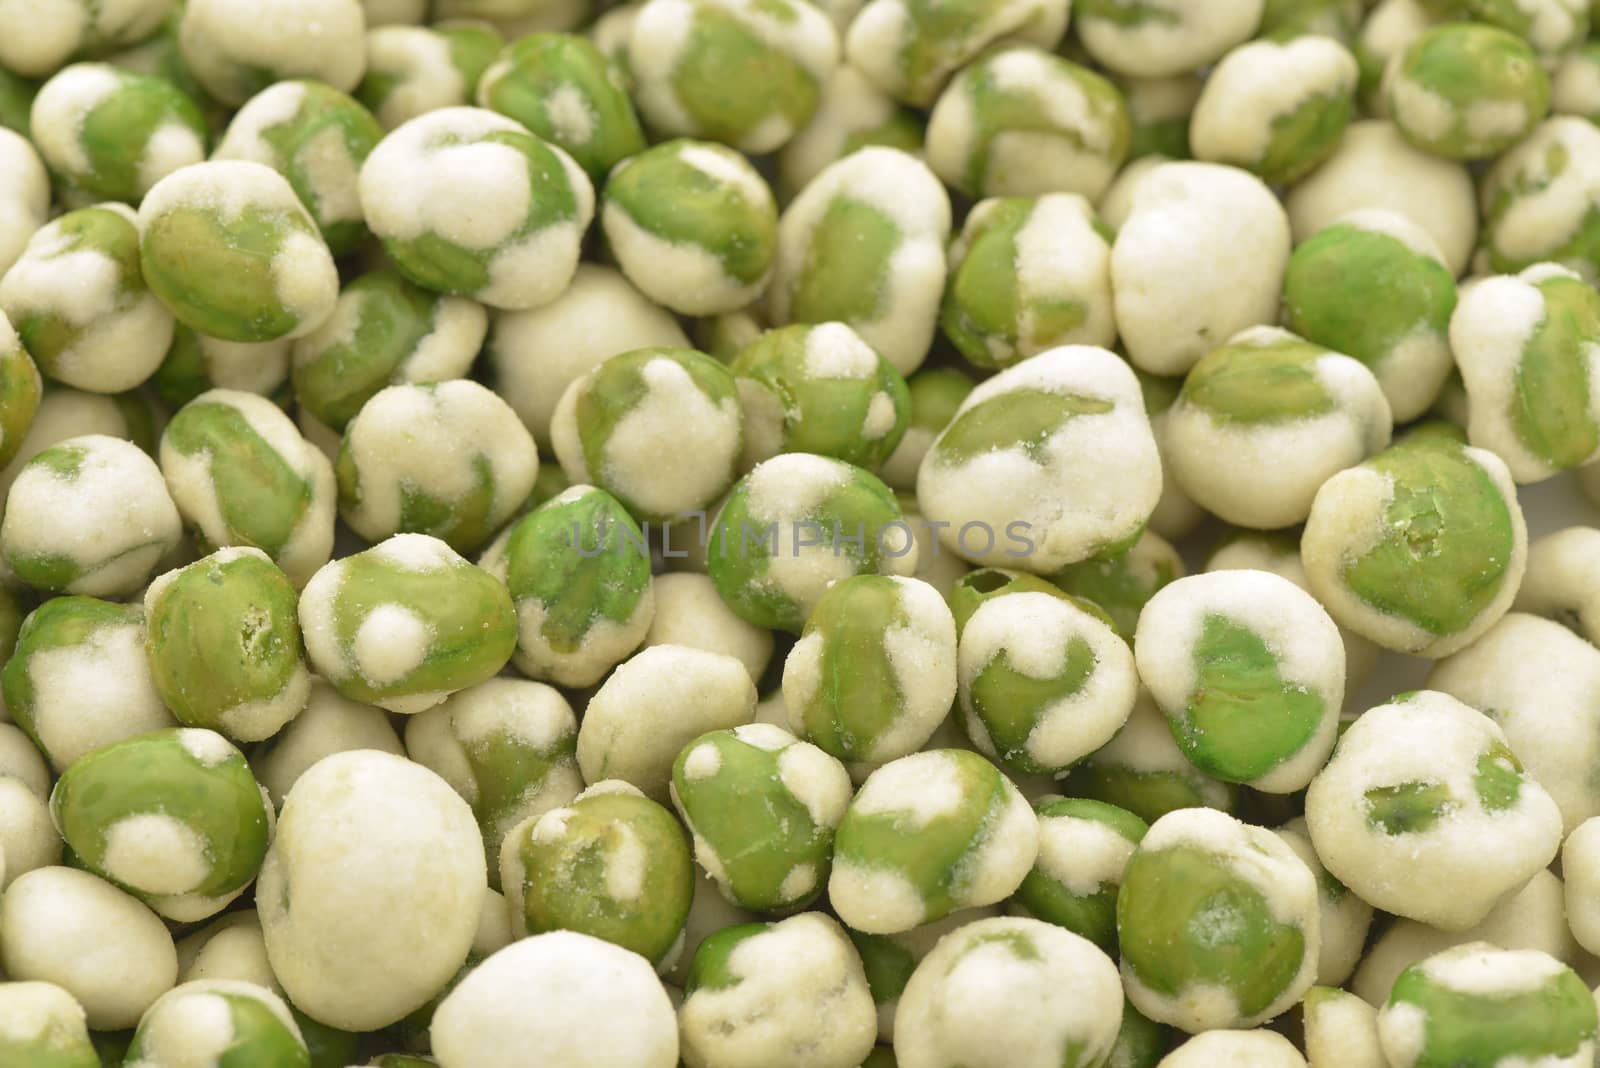 White and green wasabi peas by Hbak